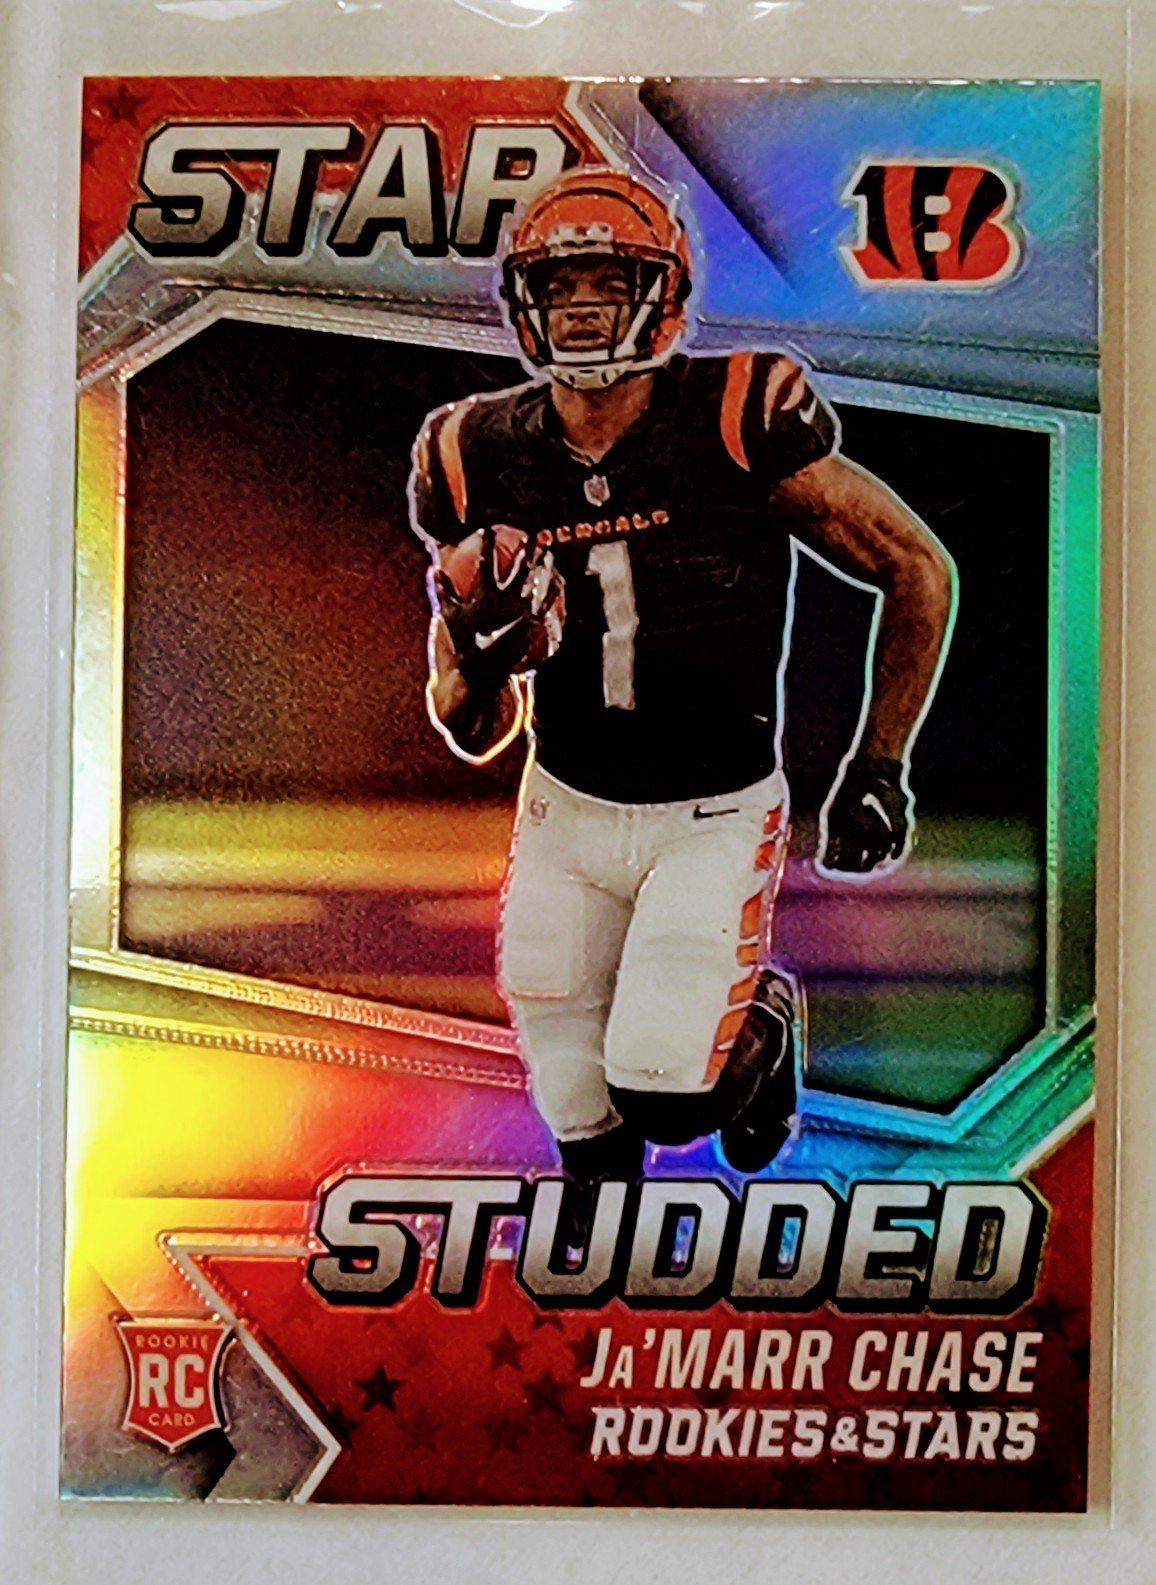 2021 Panini Rookies and Stars Ja'marr Chase Star Studded Silver Prizm Refractor Football Card AVM1 simple Xclusive Collectibles   